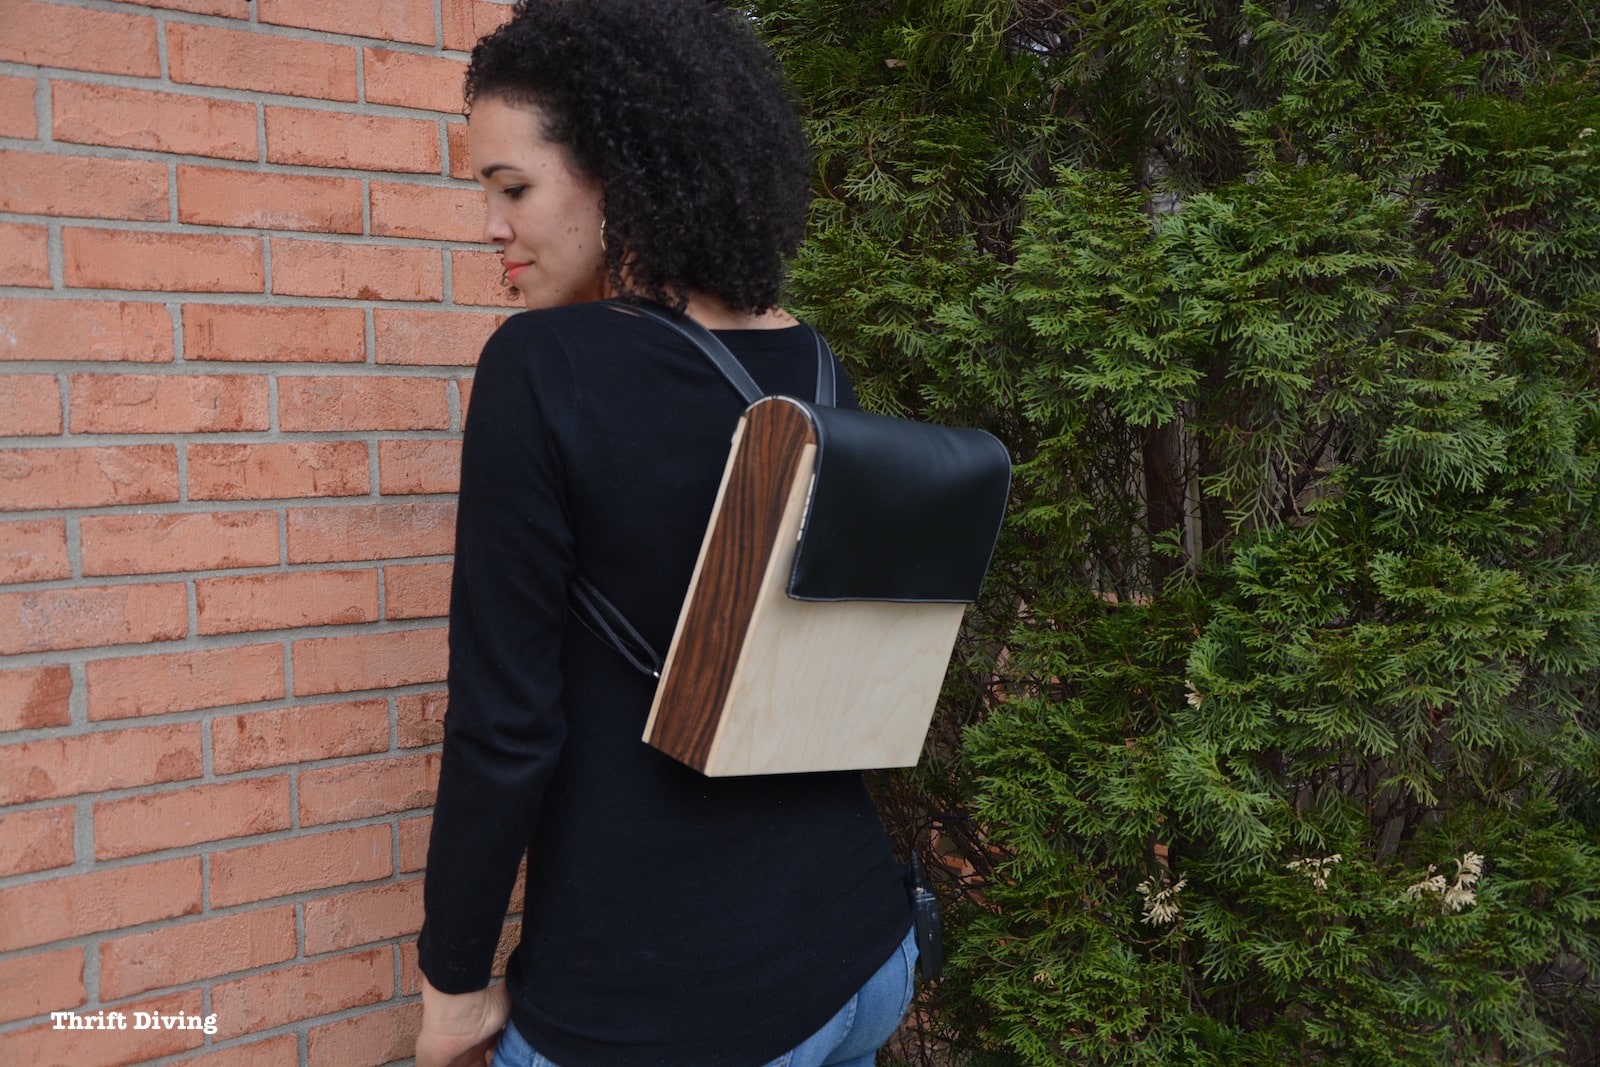 How-to-make-a-wood-backpack - Thrift Diving - Get the tutorial